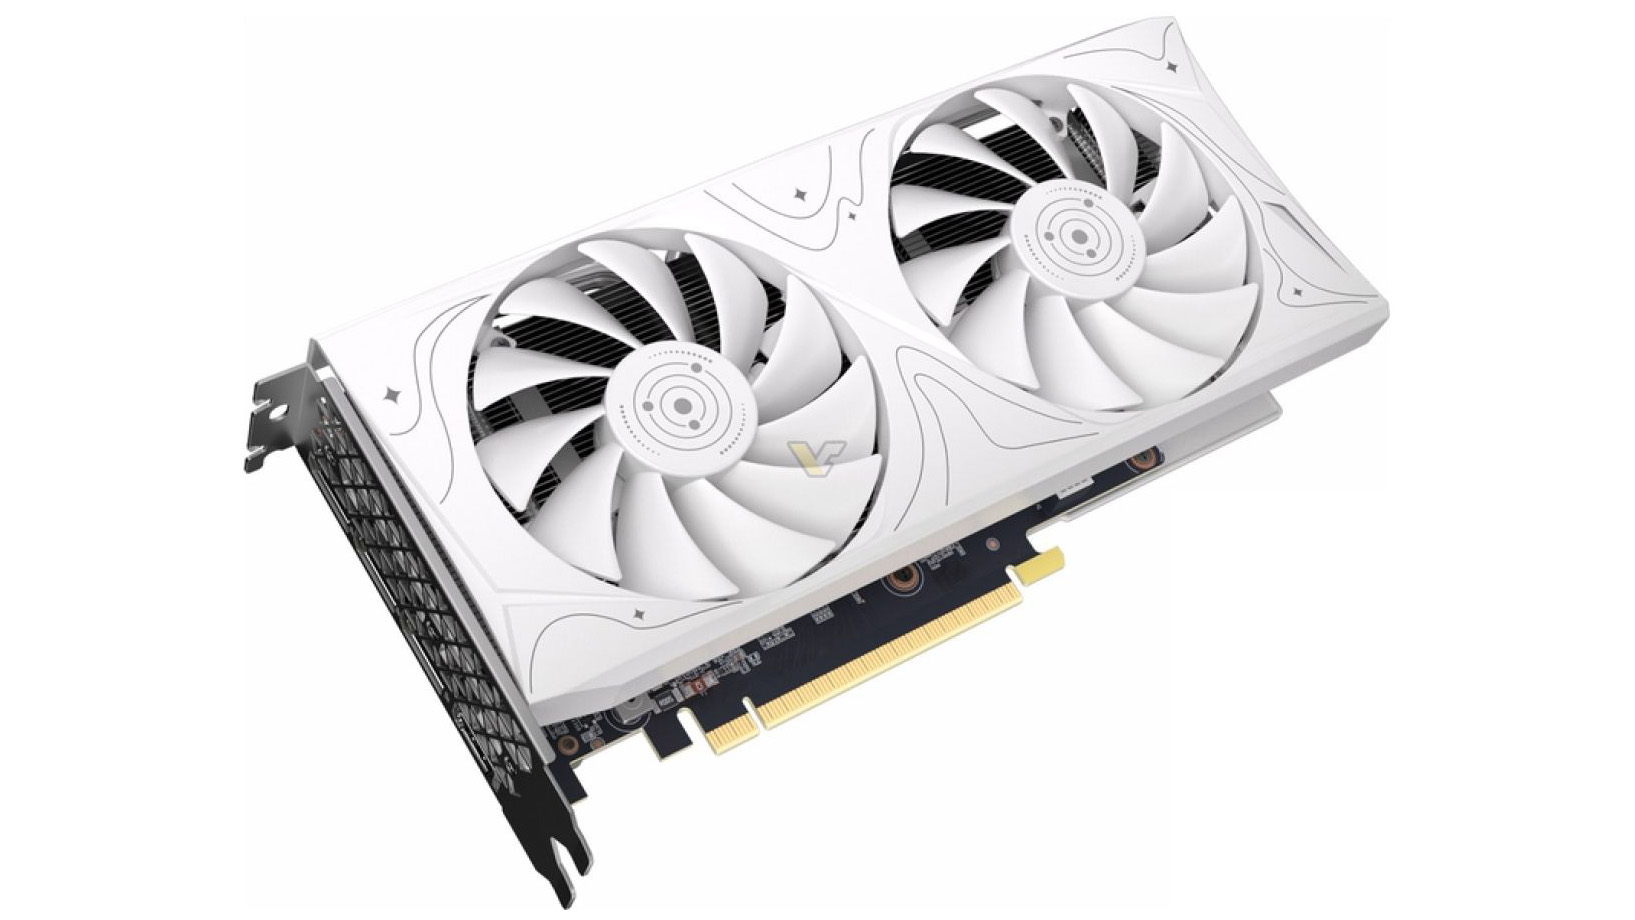 New China-exclusive RTX 4070/RTX 4060 Ti Zotac Graphics Cards